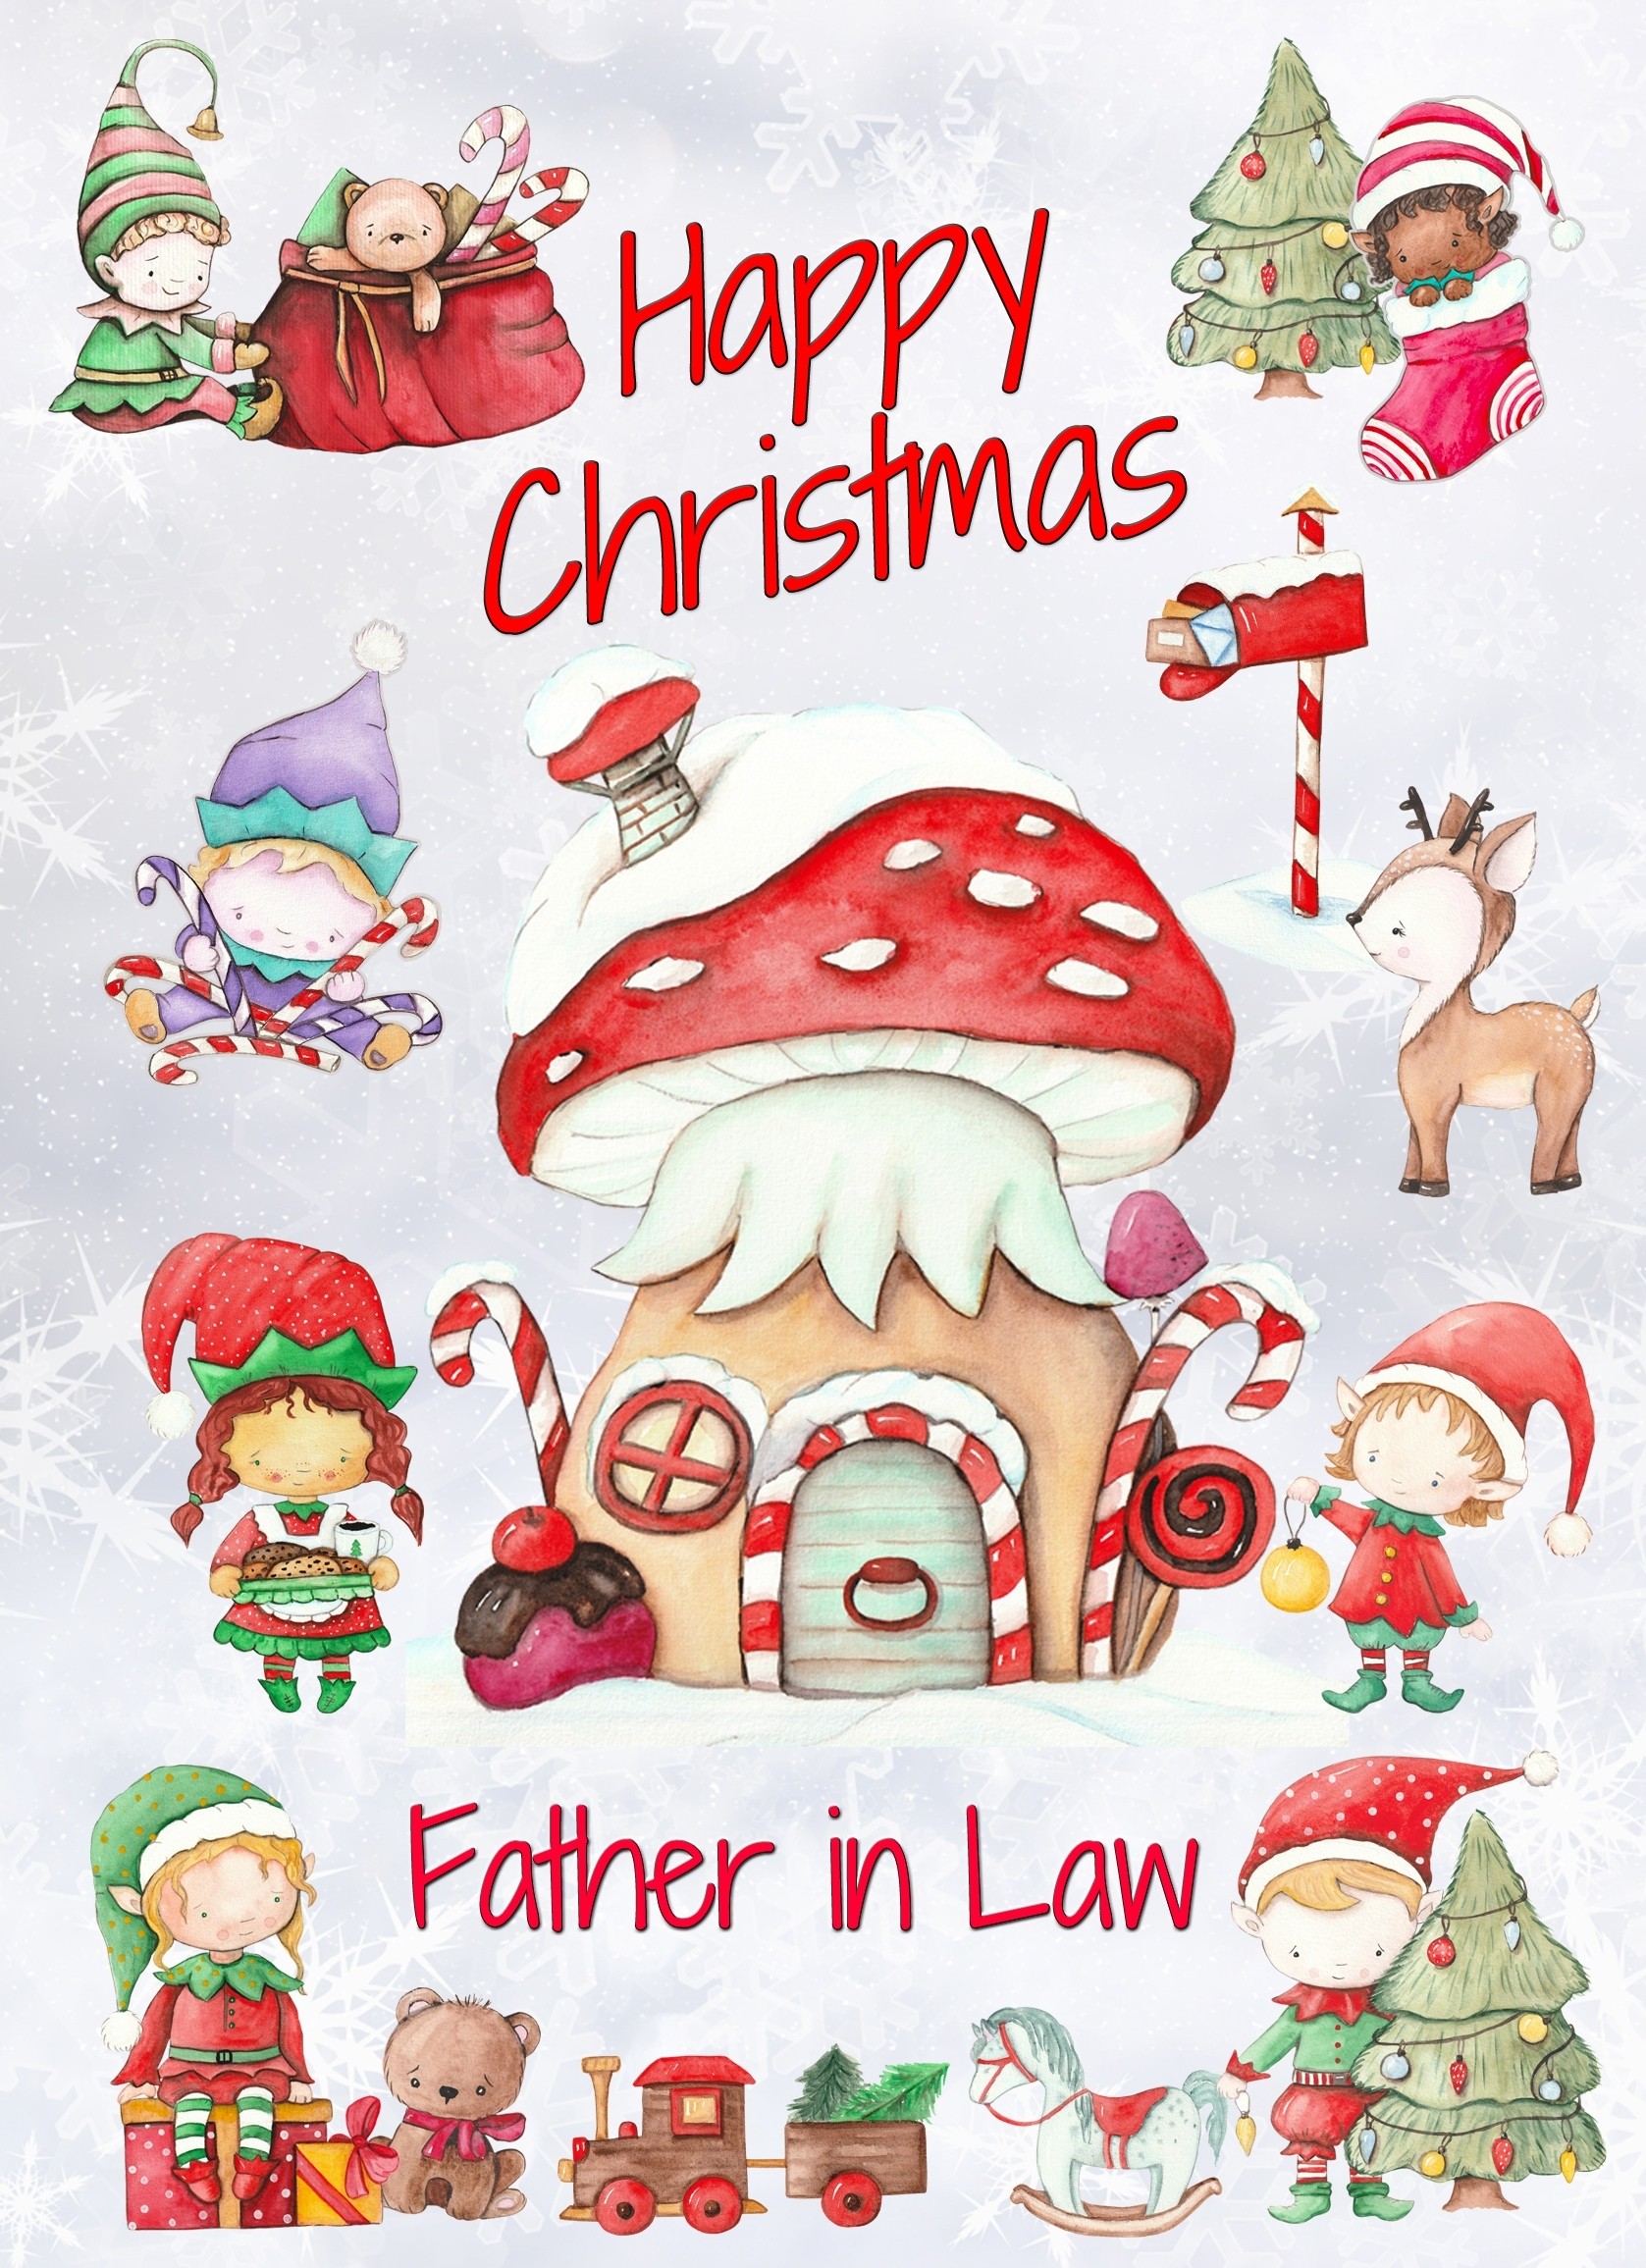 Christmas Card For Father in Law (Elf, White)